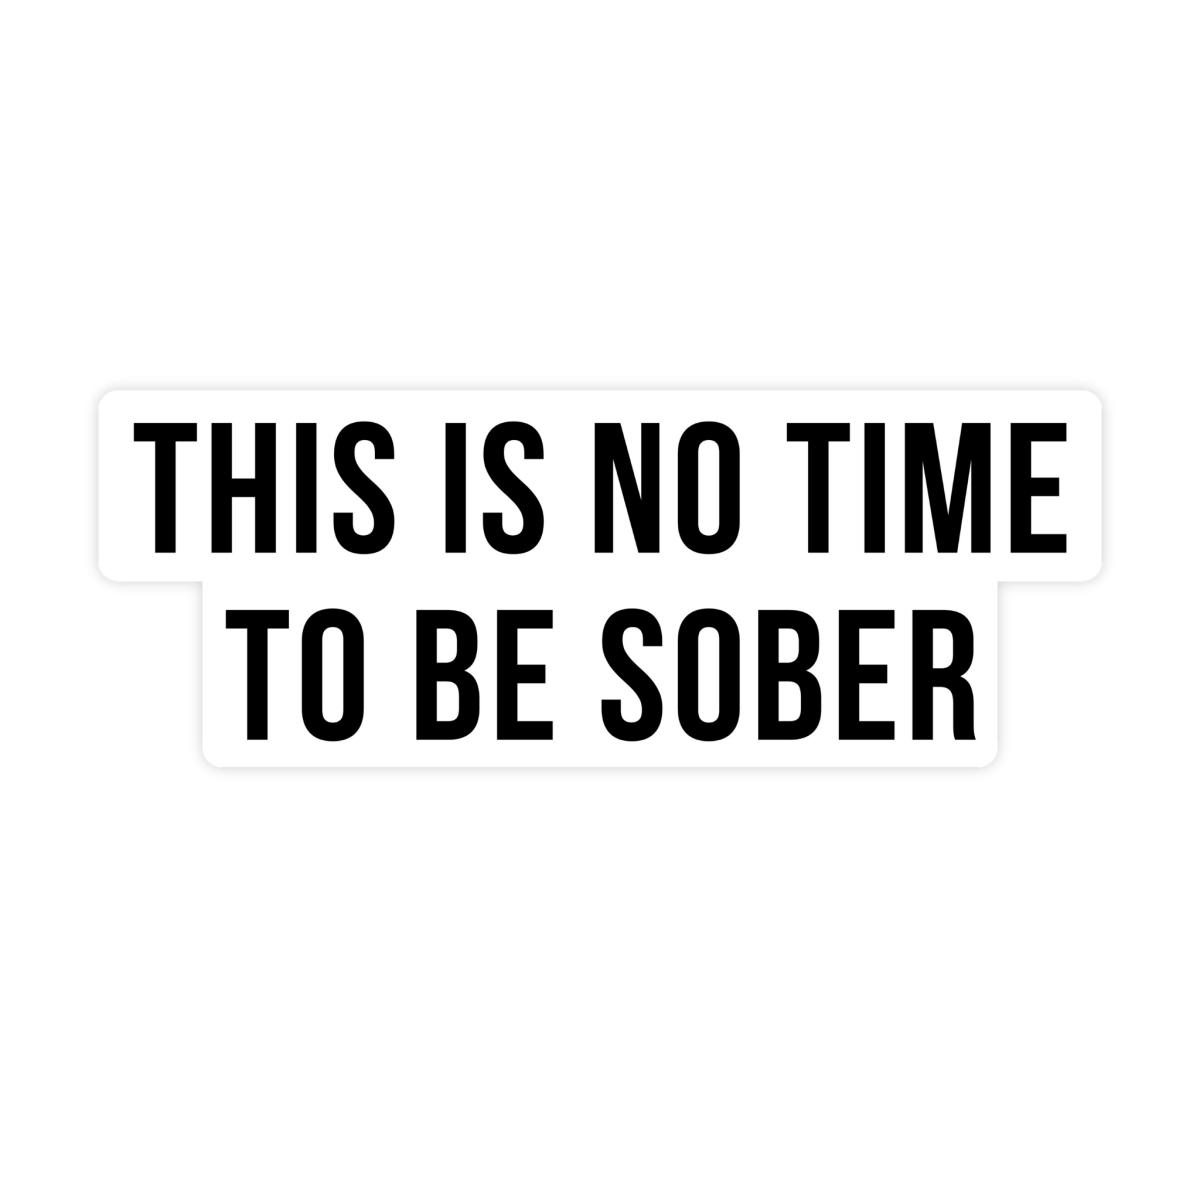 This Is No Time To Be Sober Sticker - stickerbullThis Is No Time To Be Sober StickerRetail StickerstickerbullstickerbullSage_Sober [#24]This Is No Time To Be Sober Sticker